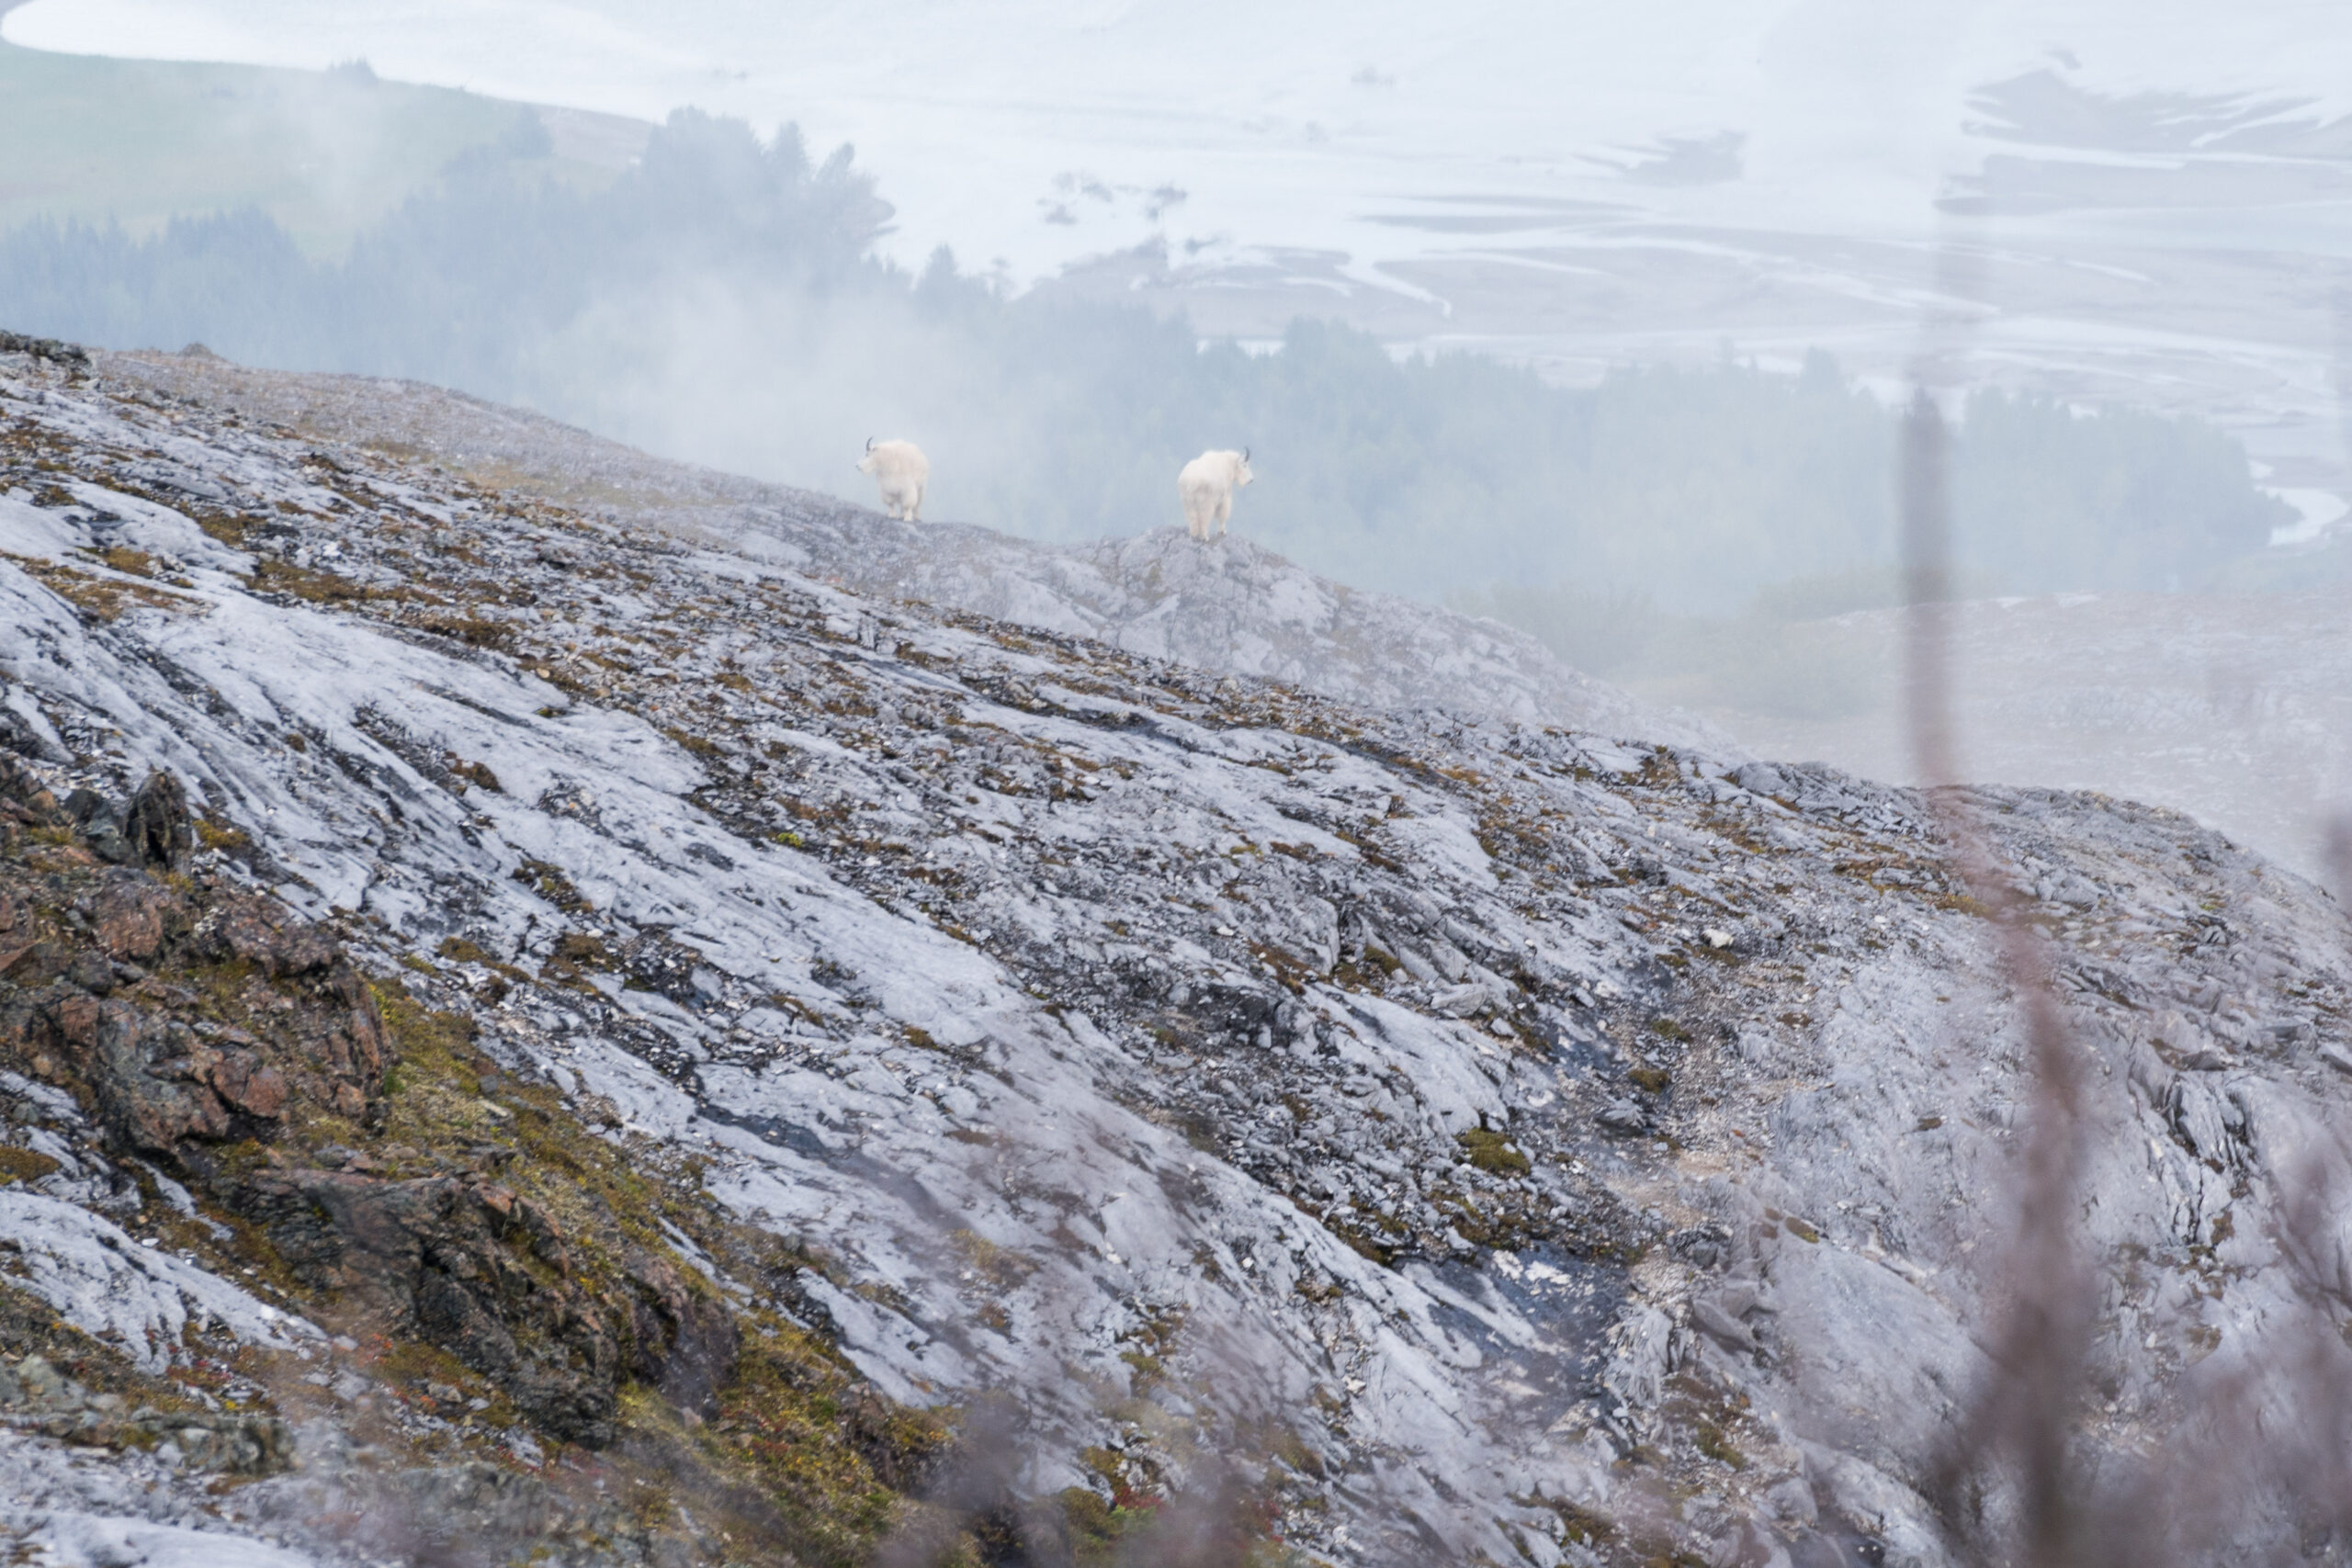 Two billy mountain goats, standing in the fog.